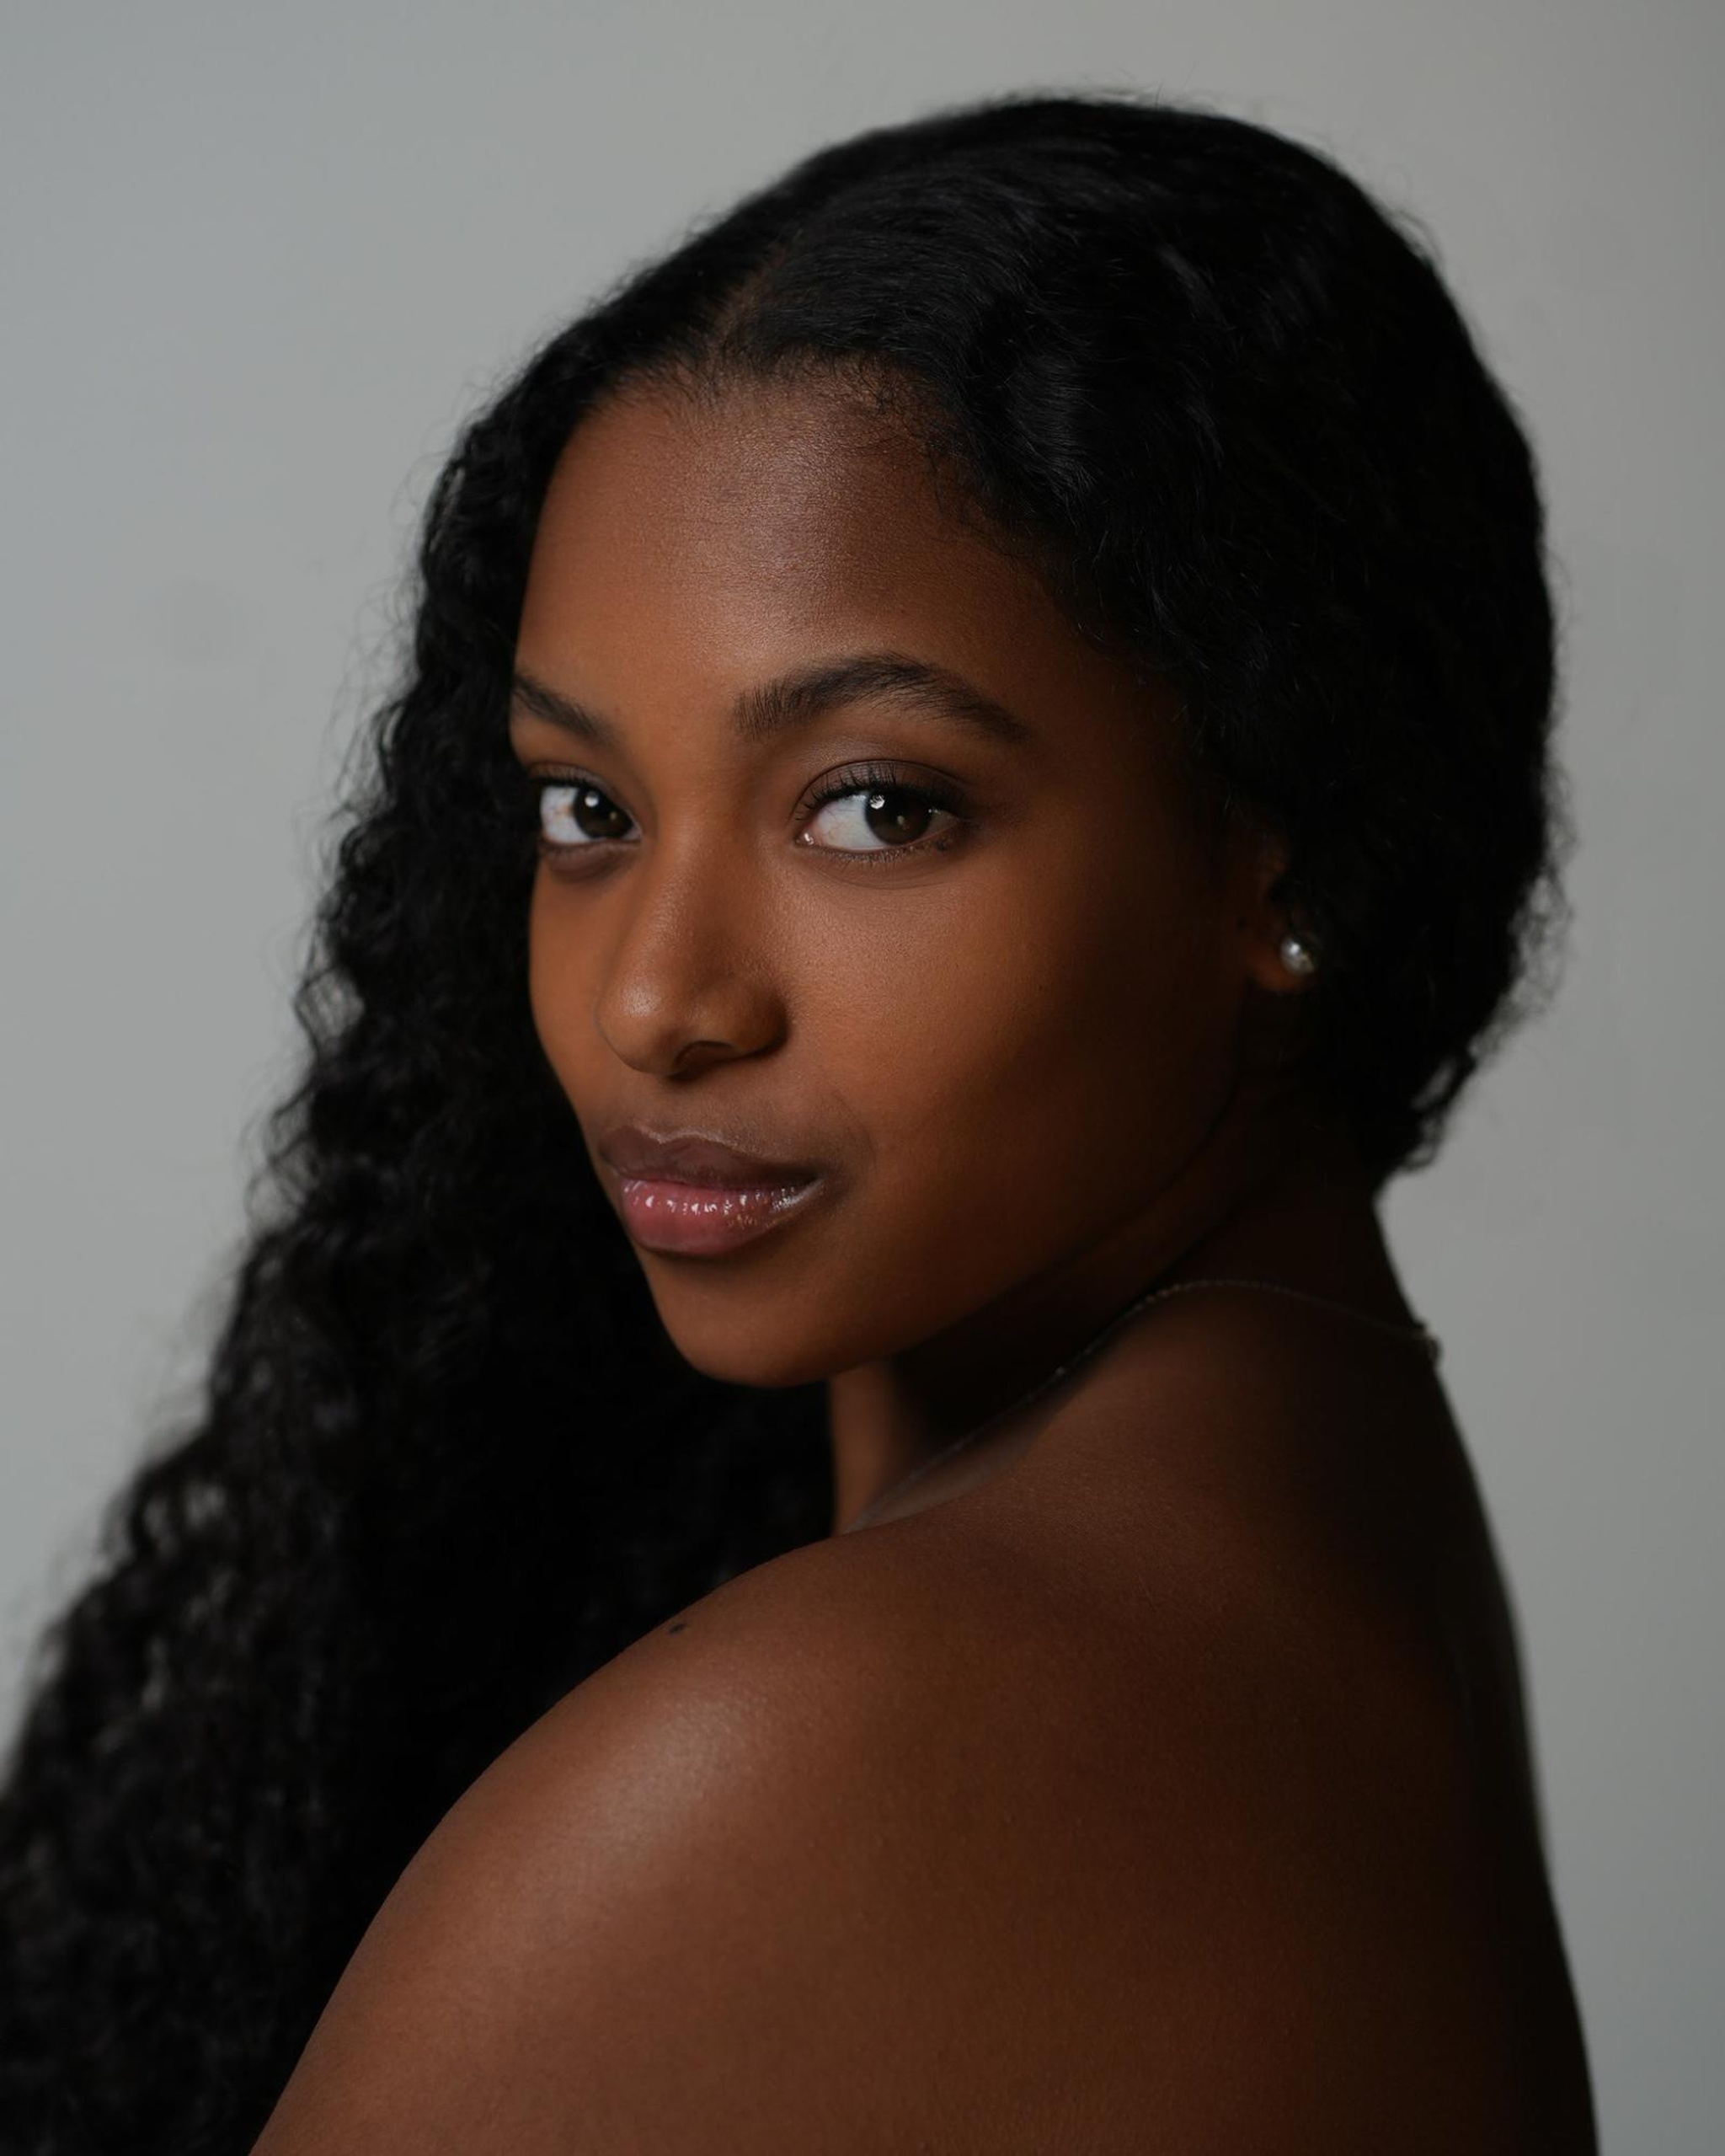 A headshot of dancer Arianna Carson, a Black woman who looks at us from over her bare shoulder. She has long wavy hair pulled around her head to hang down over her right shoulder. 